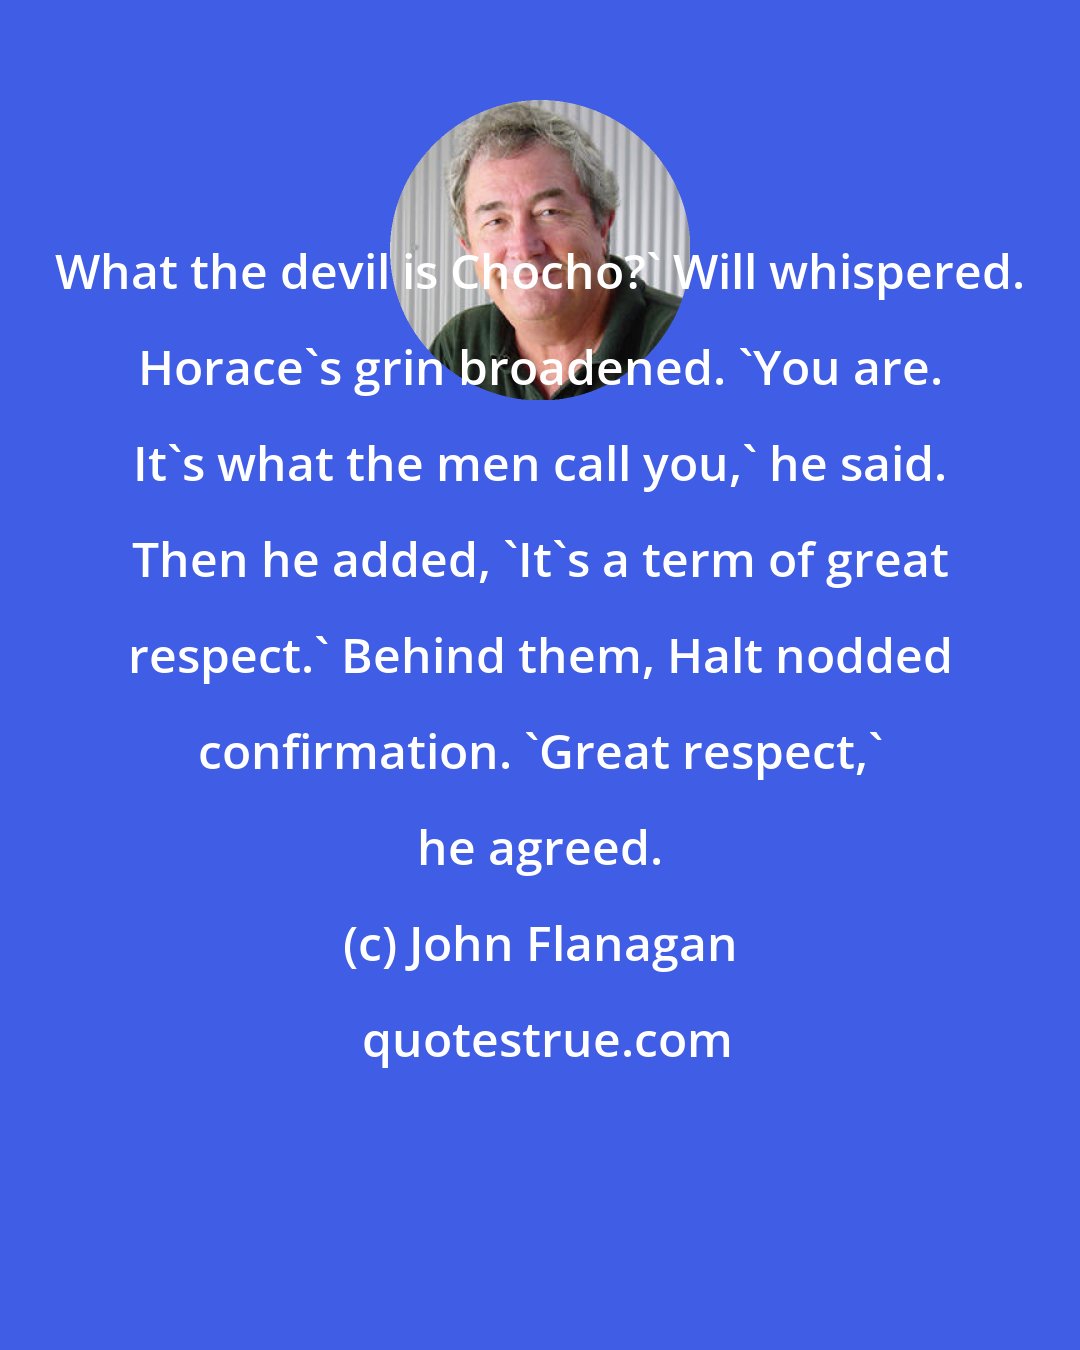 John Flanagan: What the devil is Chocho?' Will whispered. Horace's grin broadened. 'You are. It's what the men call you,' he said. Then he added, 'It's a term of great respect.' Behind them, Halt nodded confirmation. 'Great respect,' he agreed.